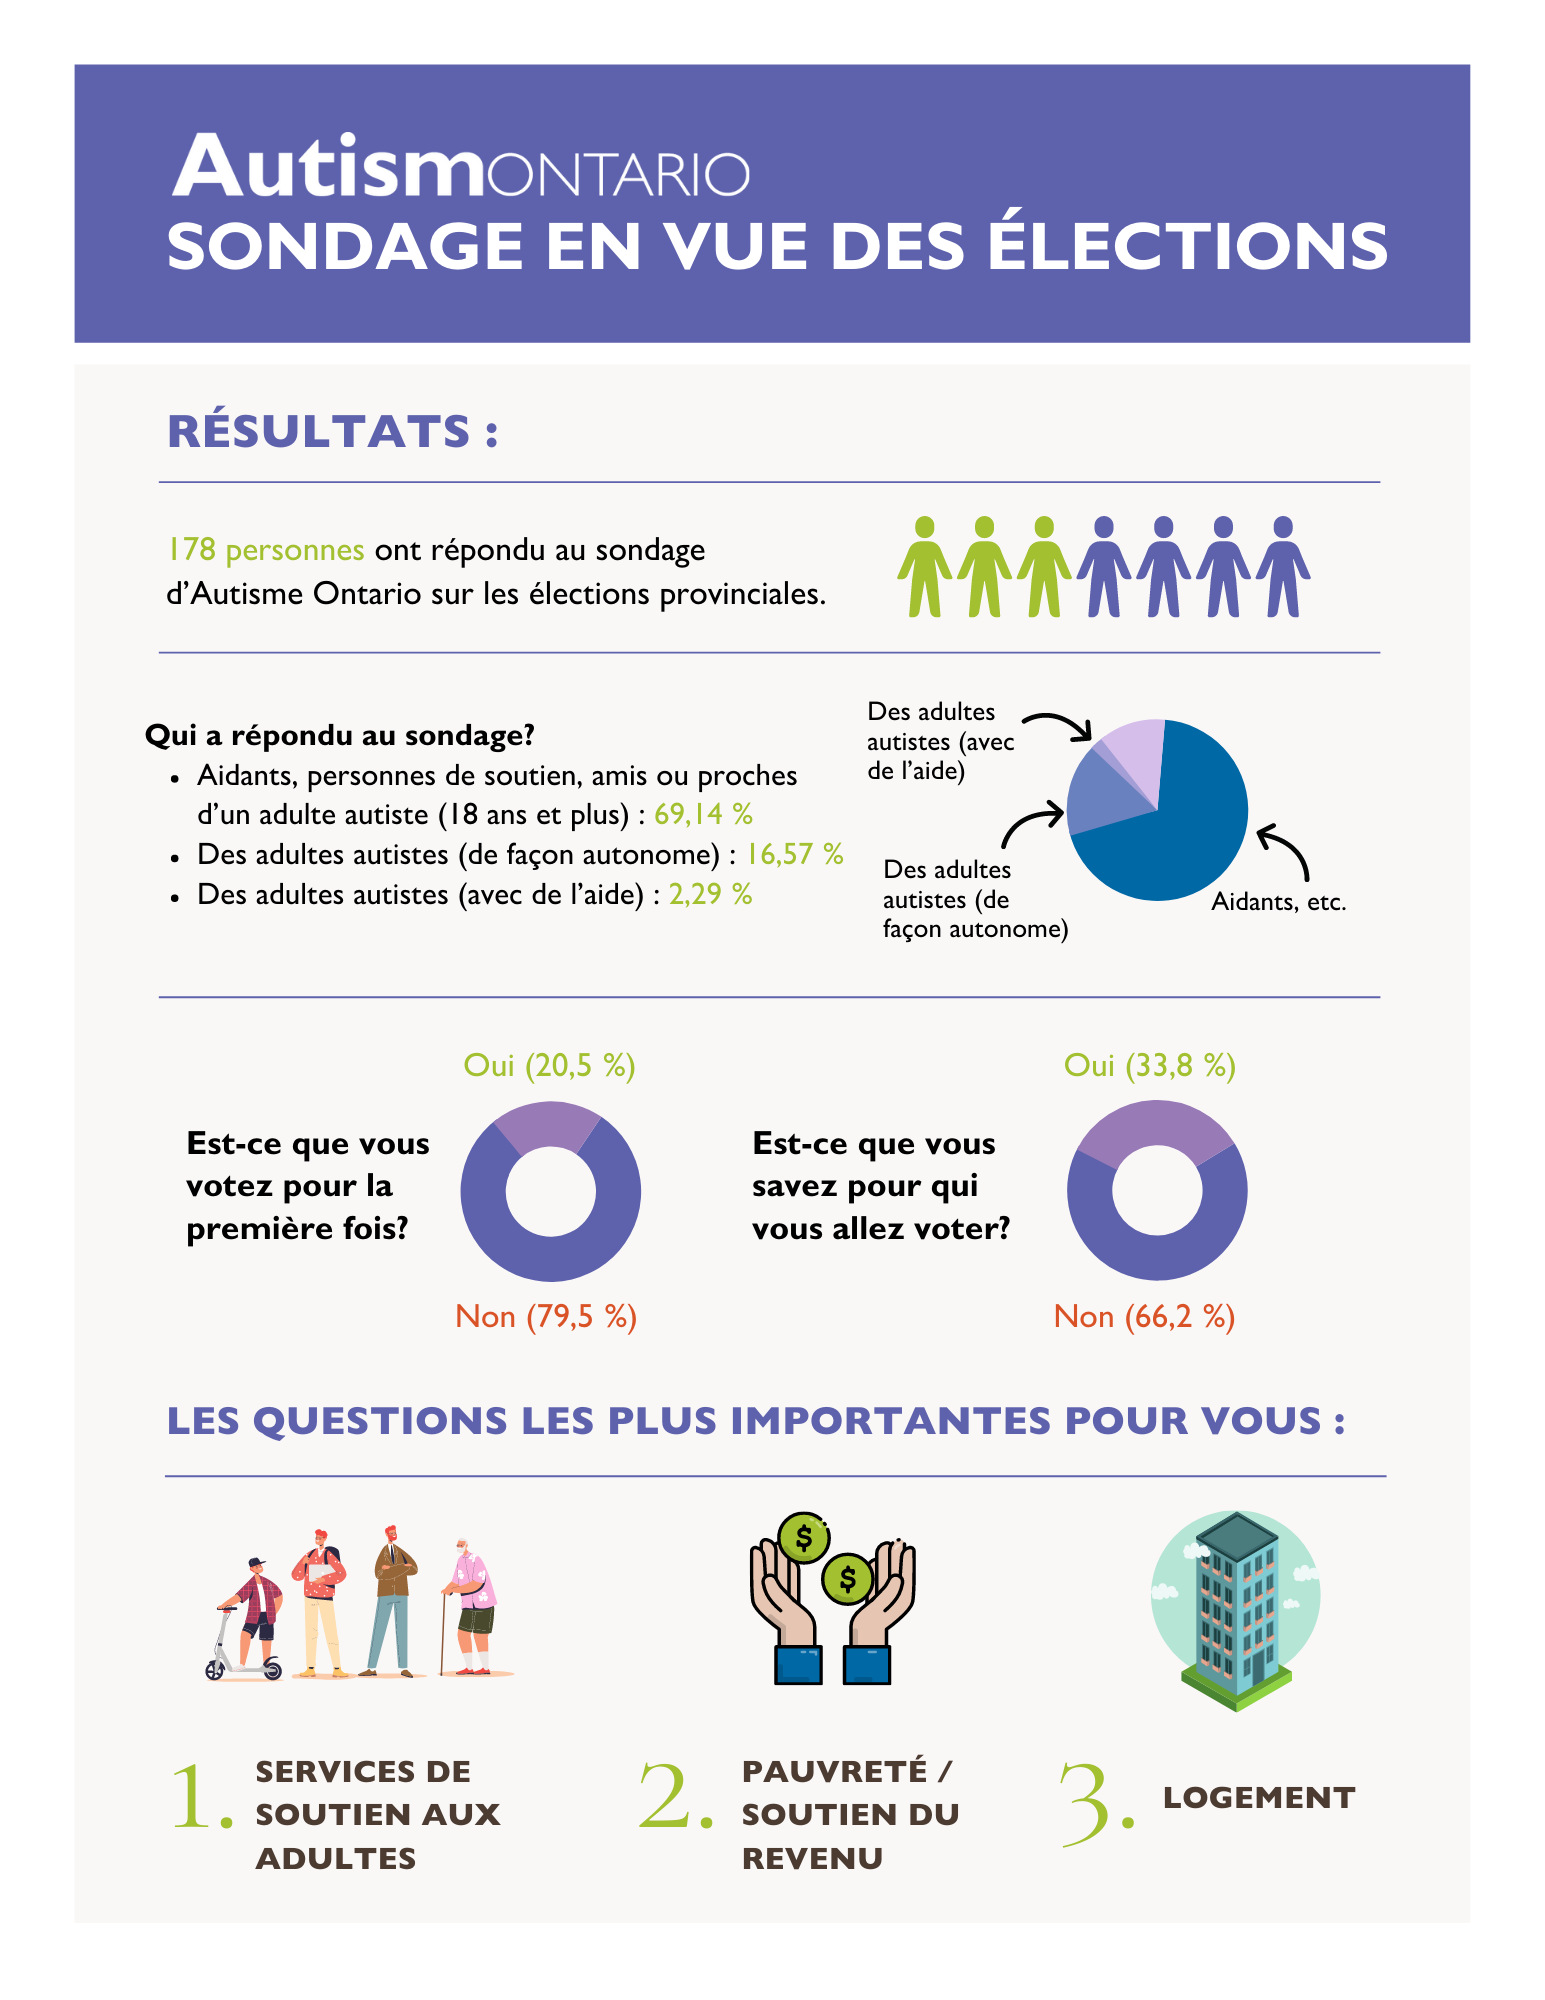 Infographic depicting key results from Autism Ontario's provincial election survey